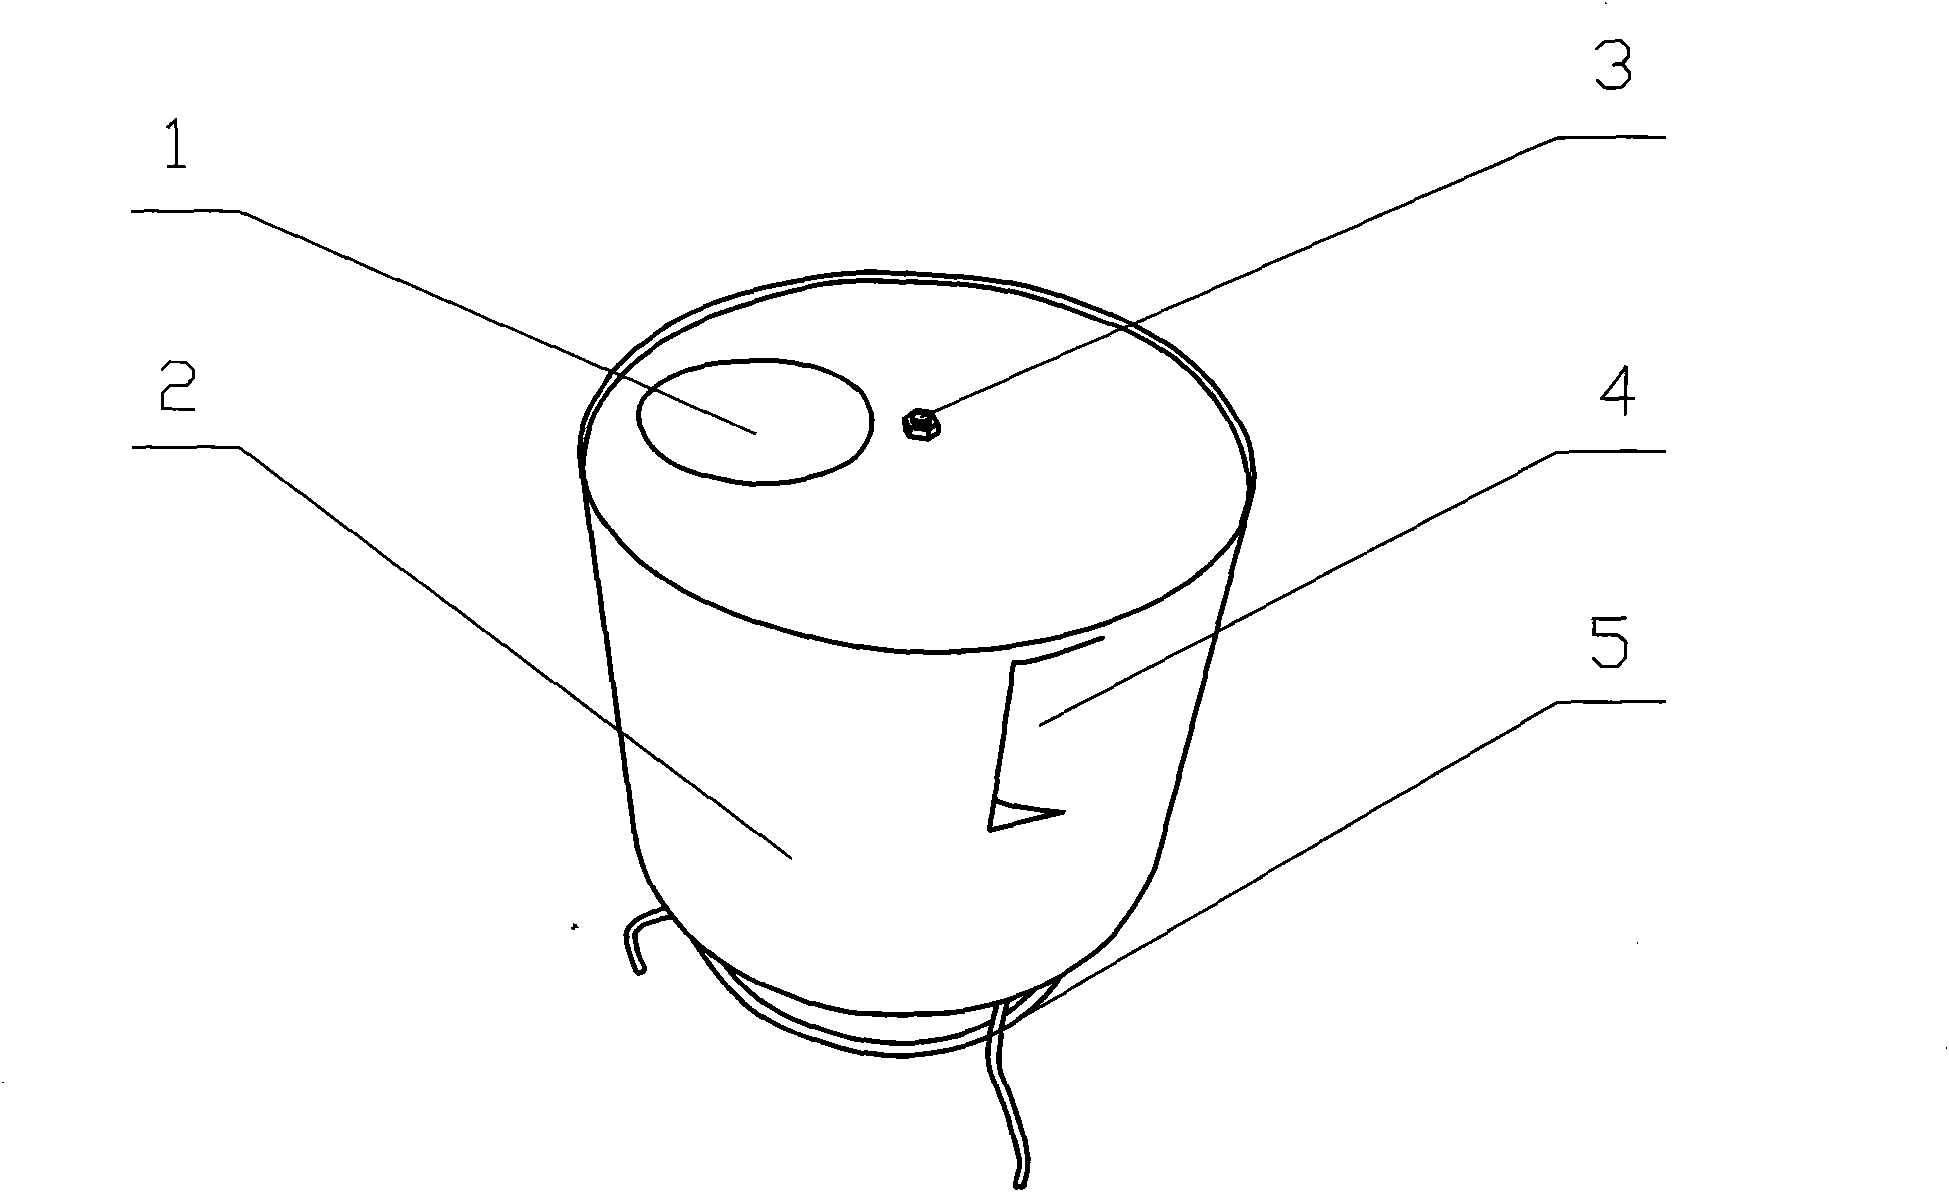 Cotton separating device